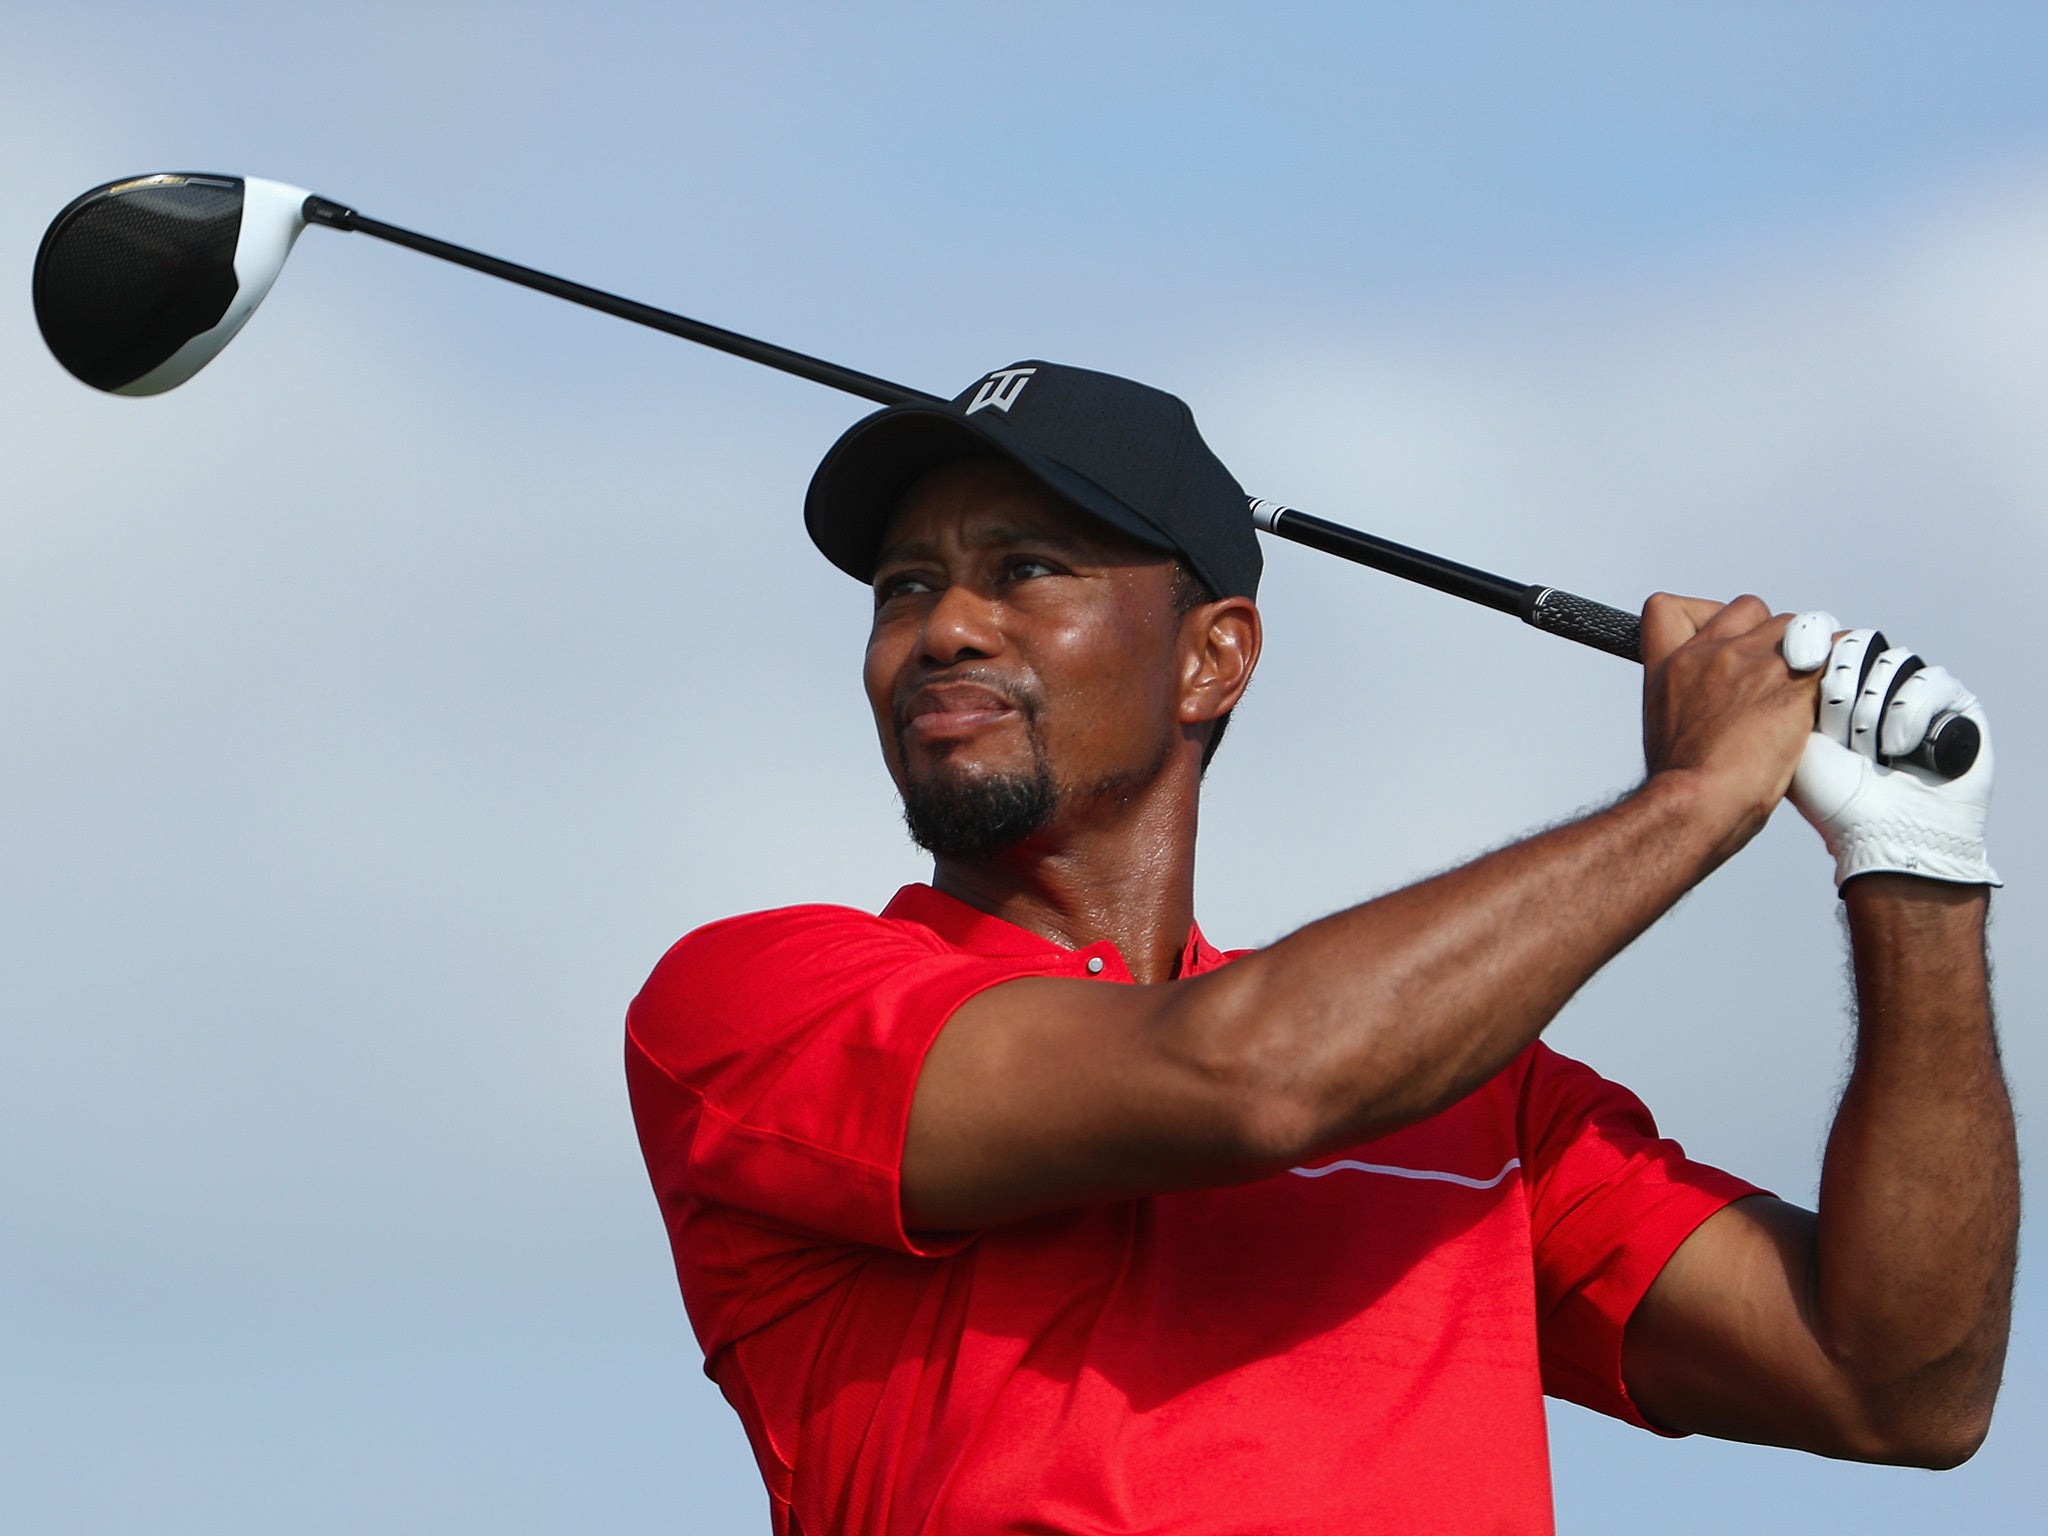 Woods finished the tournament as the leading birdie-maker, with 24